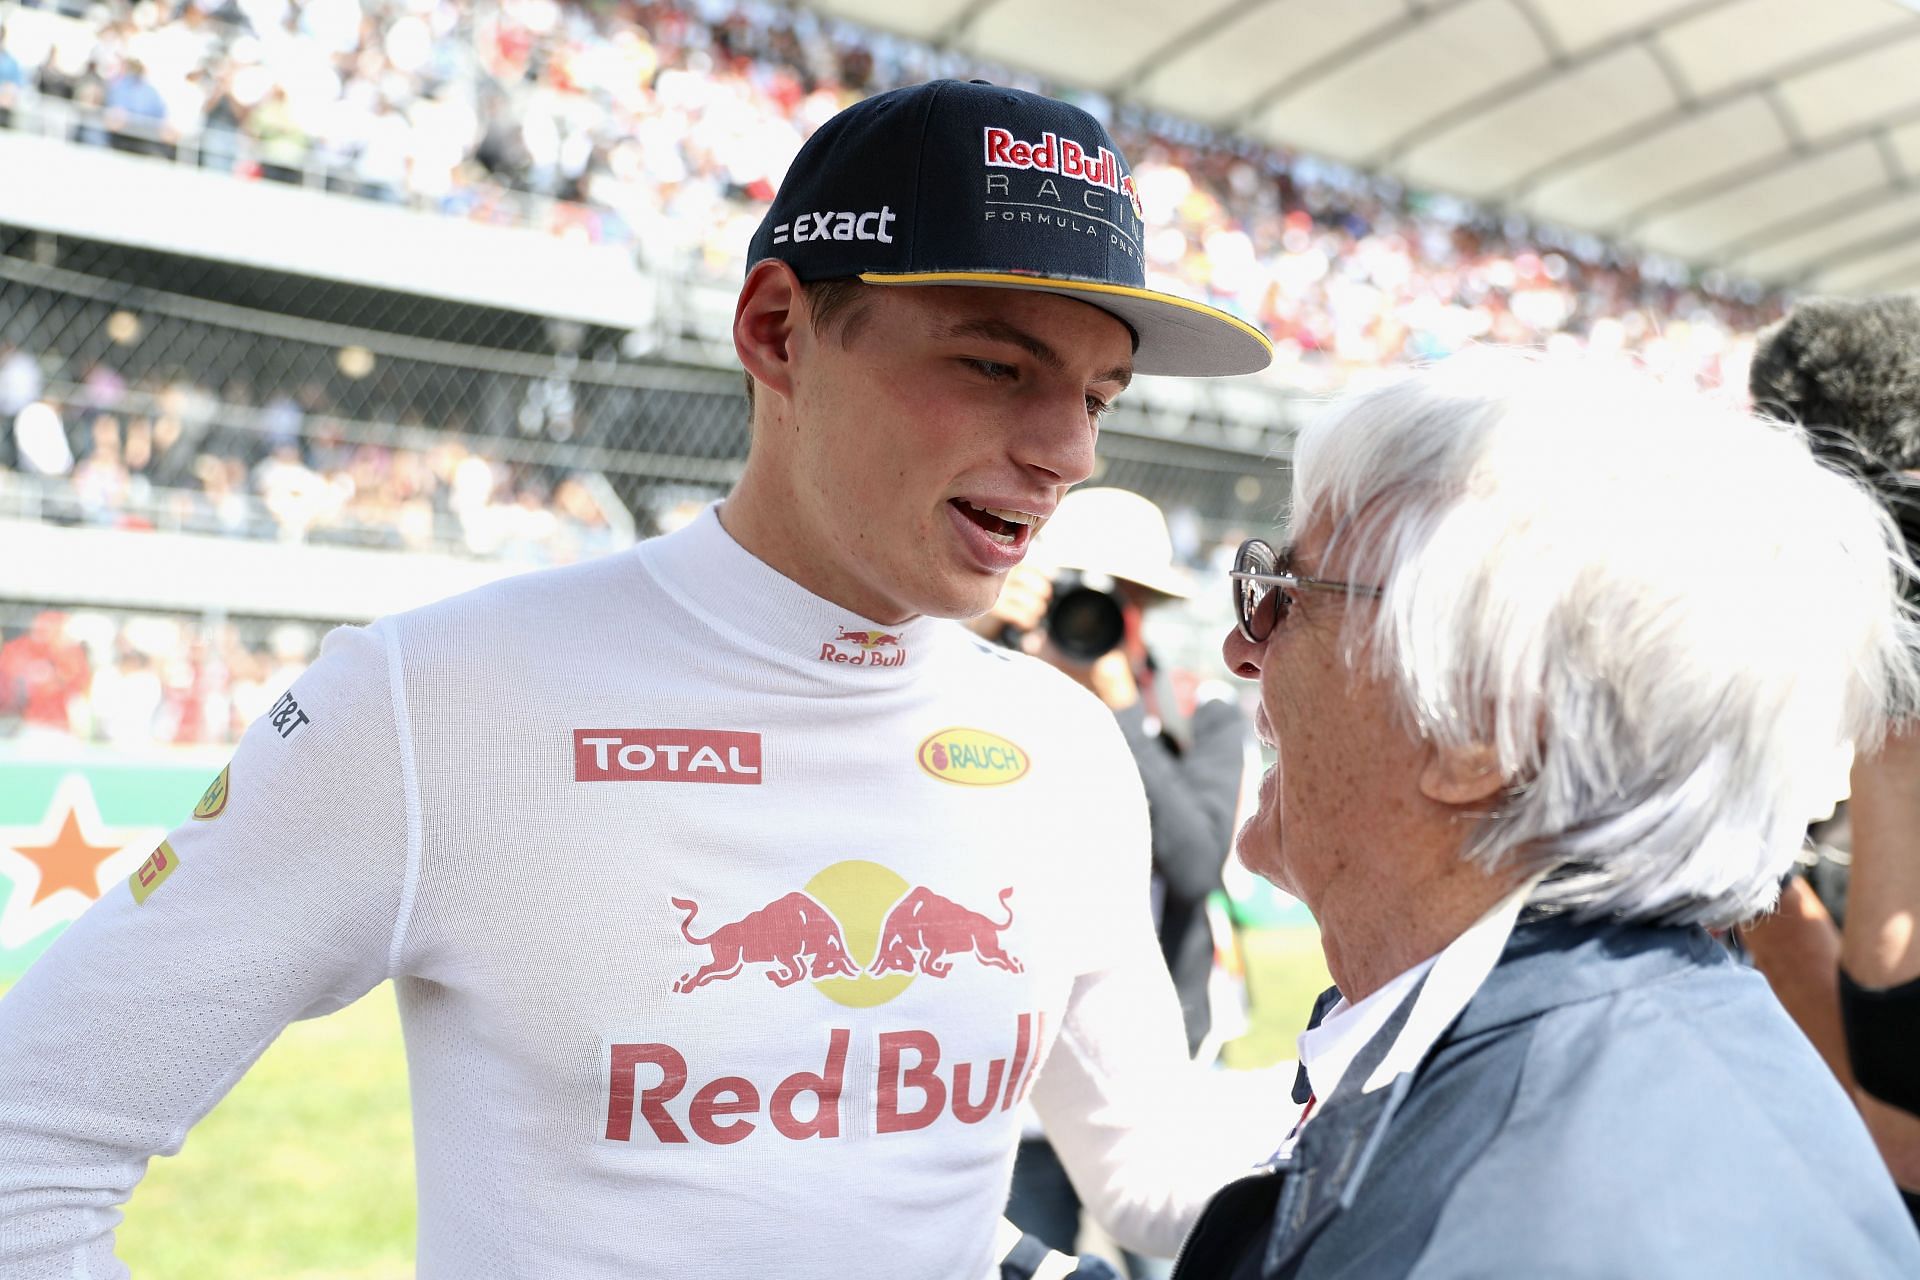 Max Verstappen talks with F1 supremo Bernie Ecclestone on the grid before 2021 Mexican GP. (Photo by Mark Thompson/Getty Images)